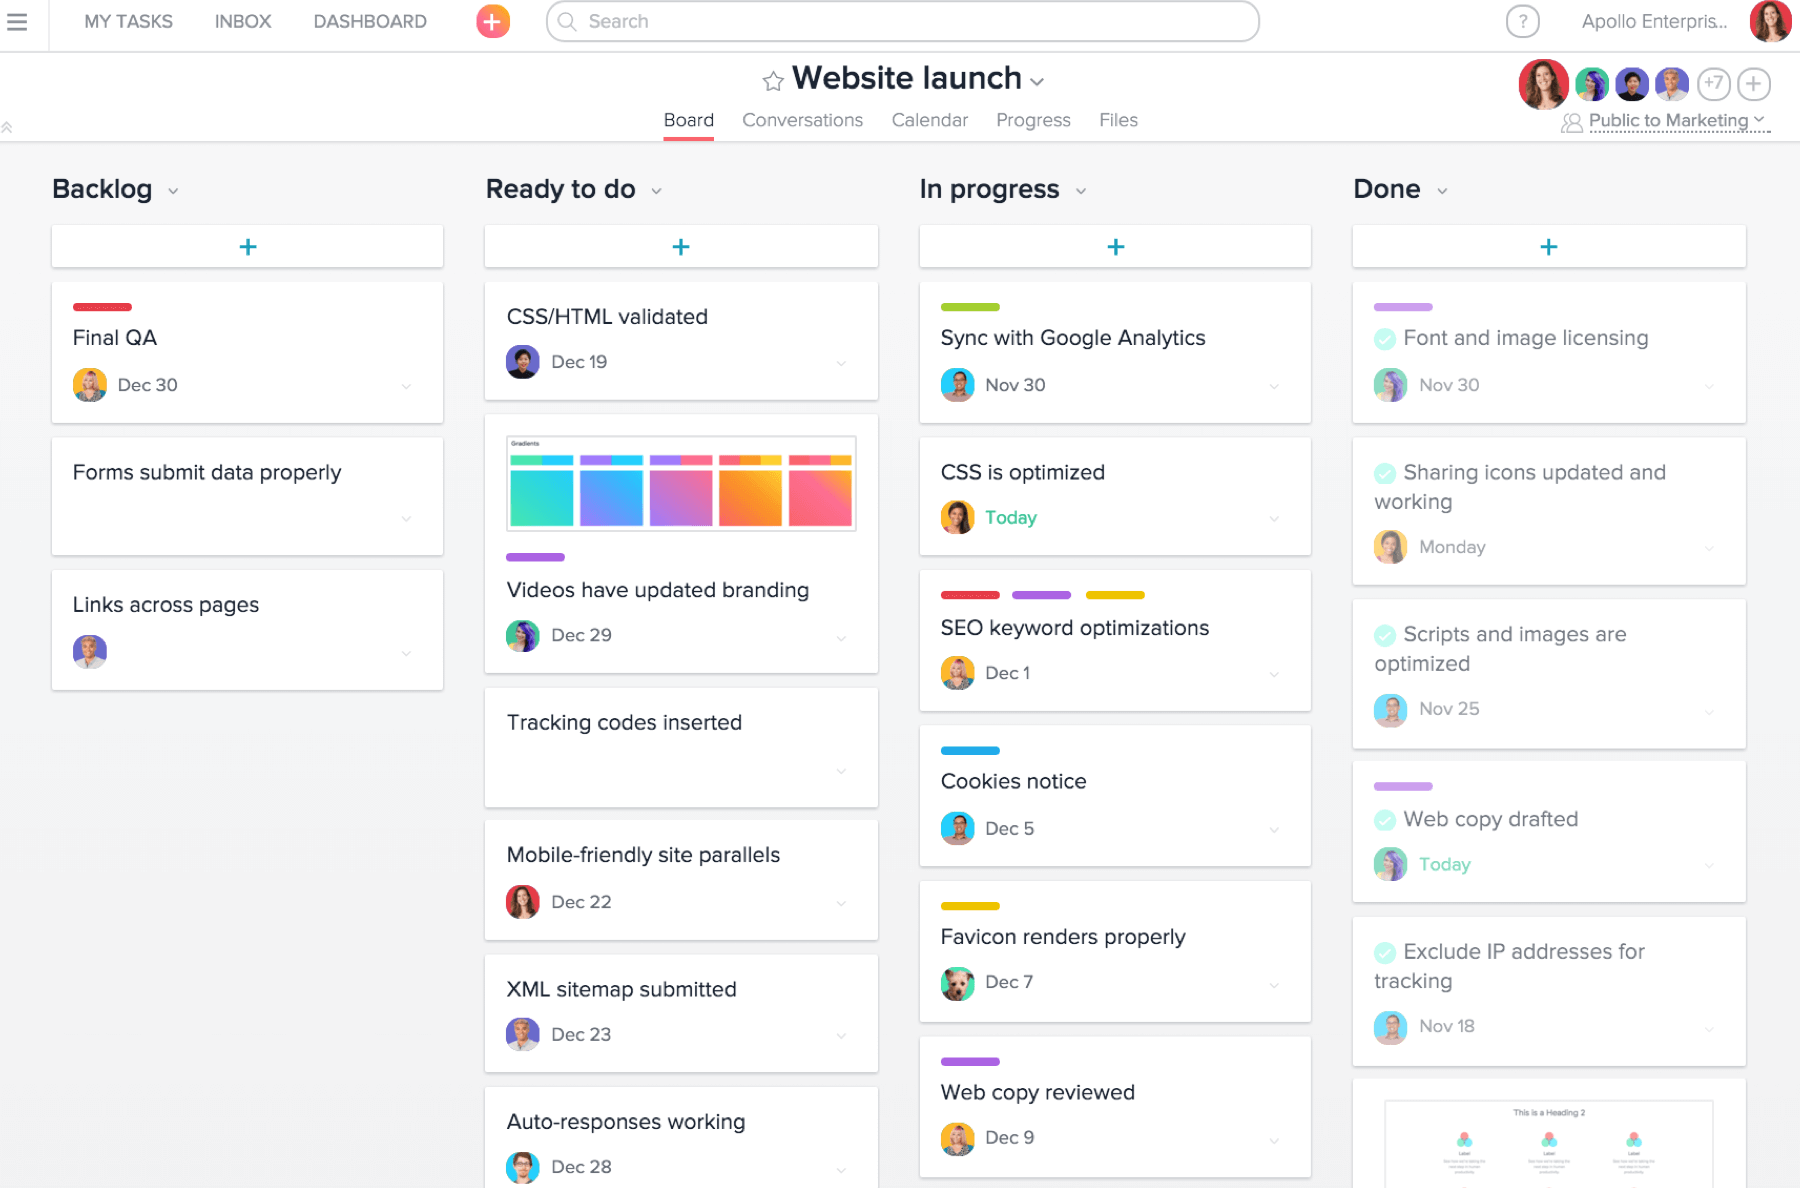 Asana is a practical work management platform that has features for digital marketers